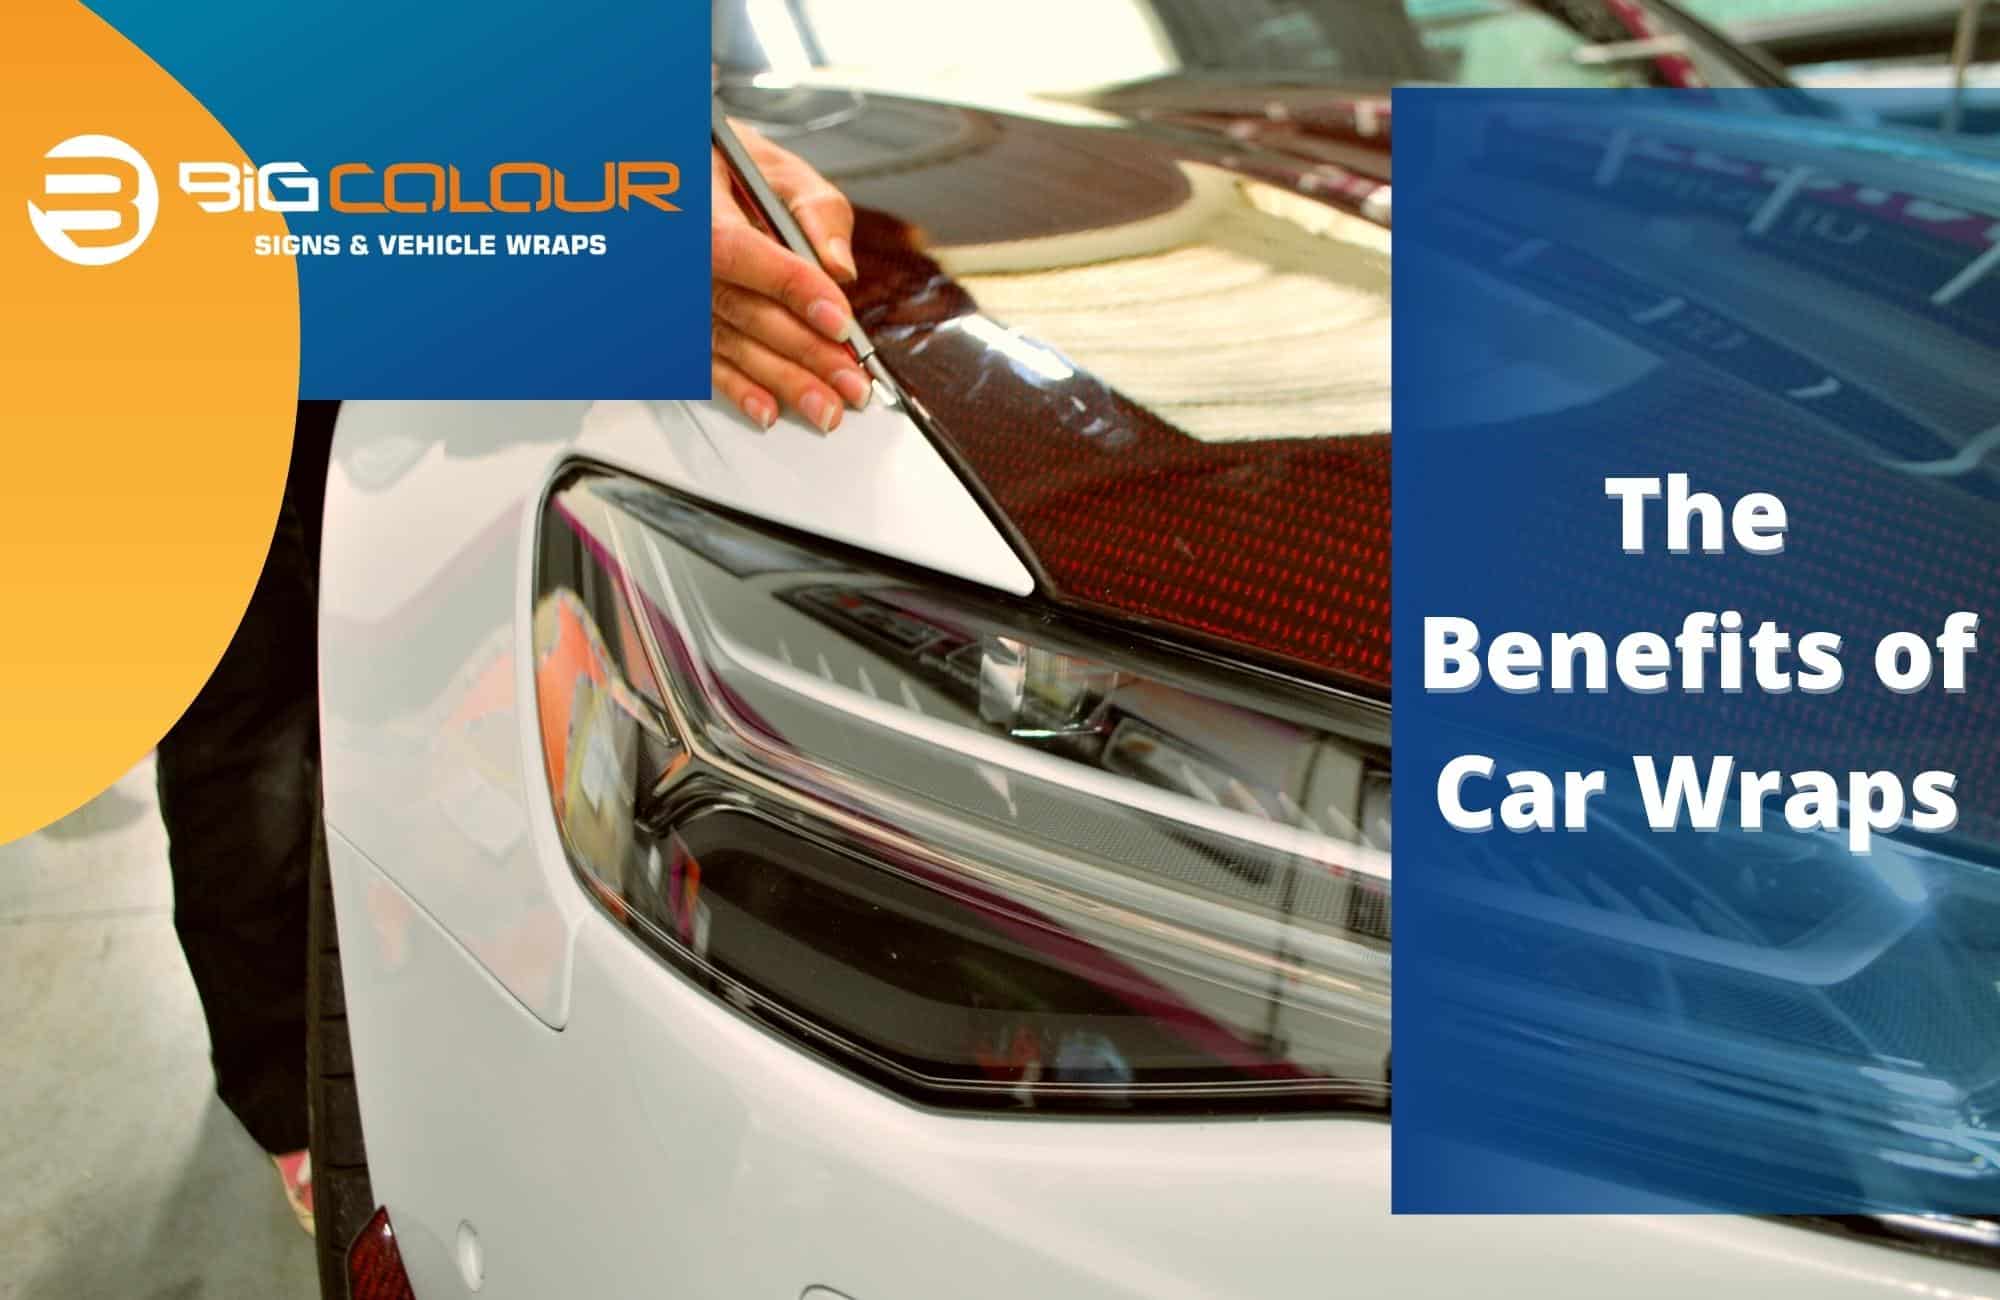 The Benefits of Car Wraps